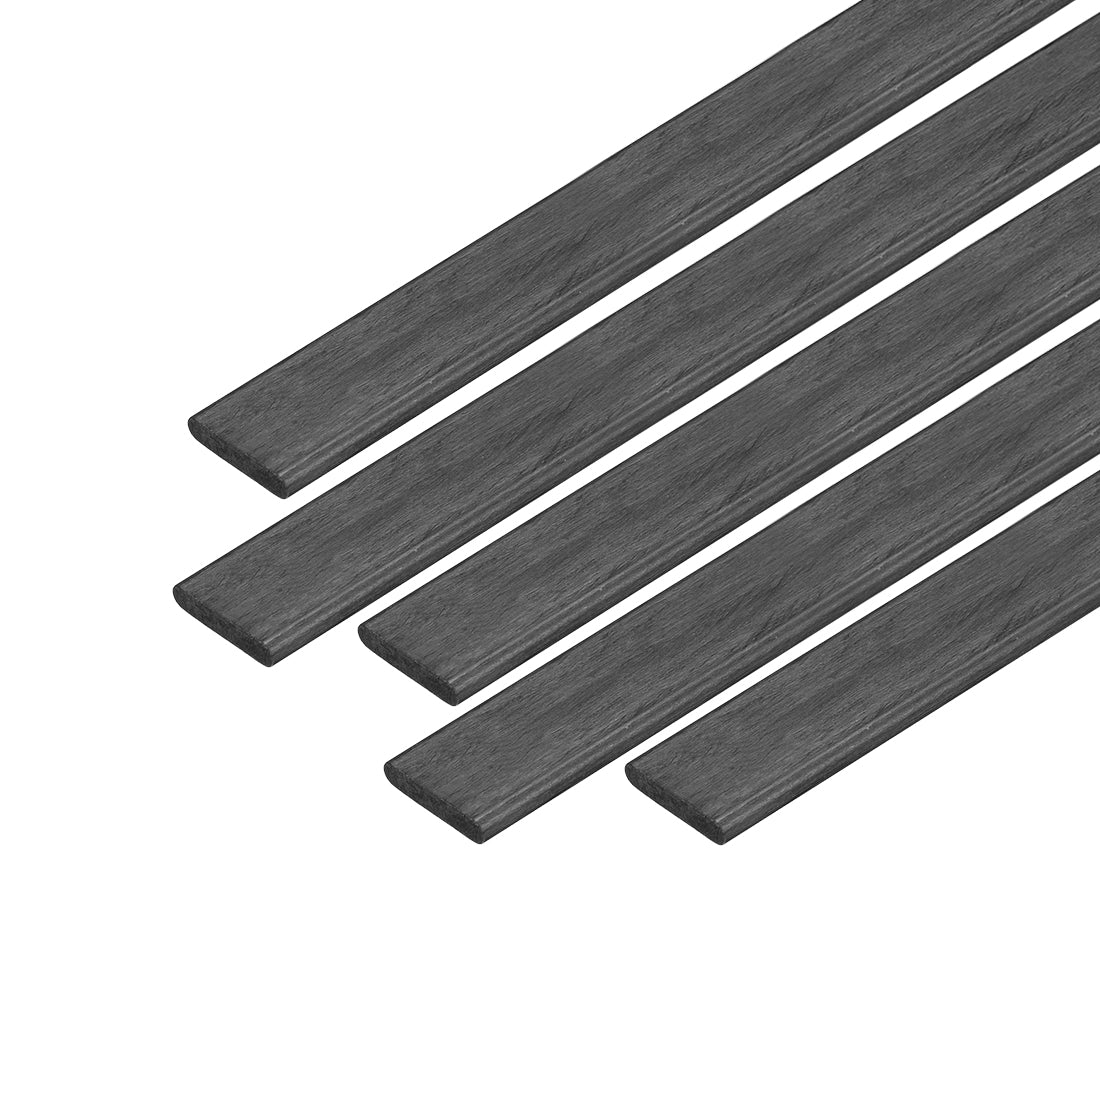 uxcell Uxcell Carbon Fiber Strip Bars 2x10mm 200mm Length Pultruded Carbon Fiber Strips for Kites, RC Airplane 5 Pcs